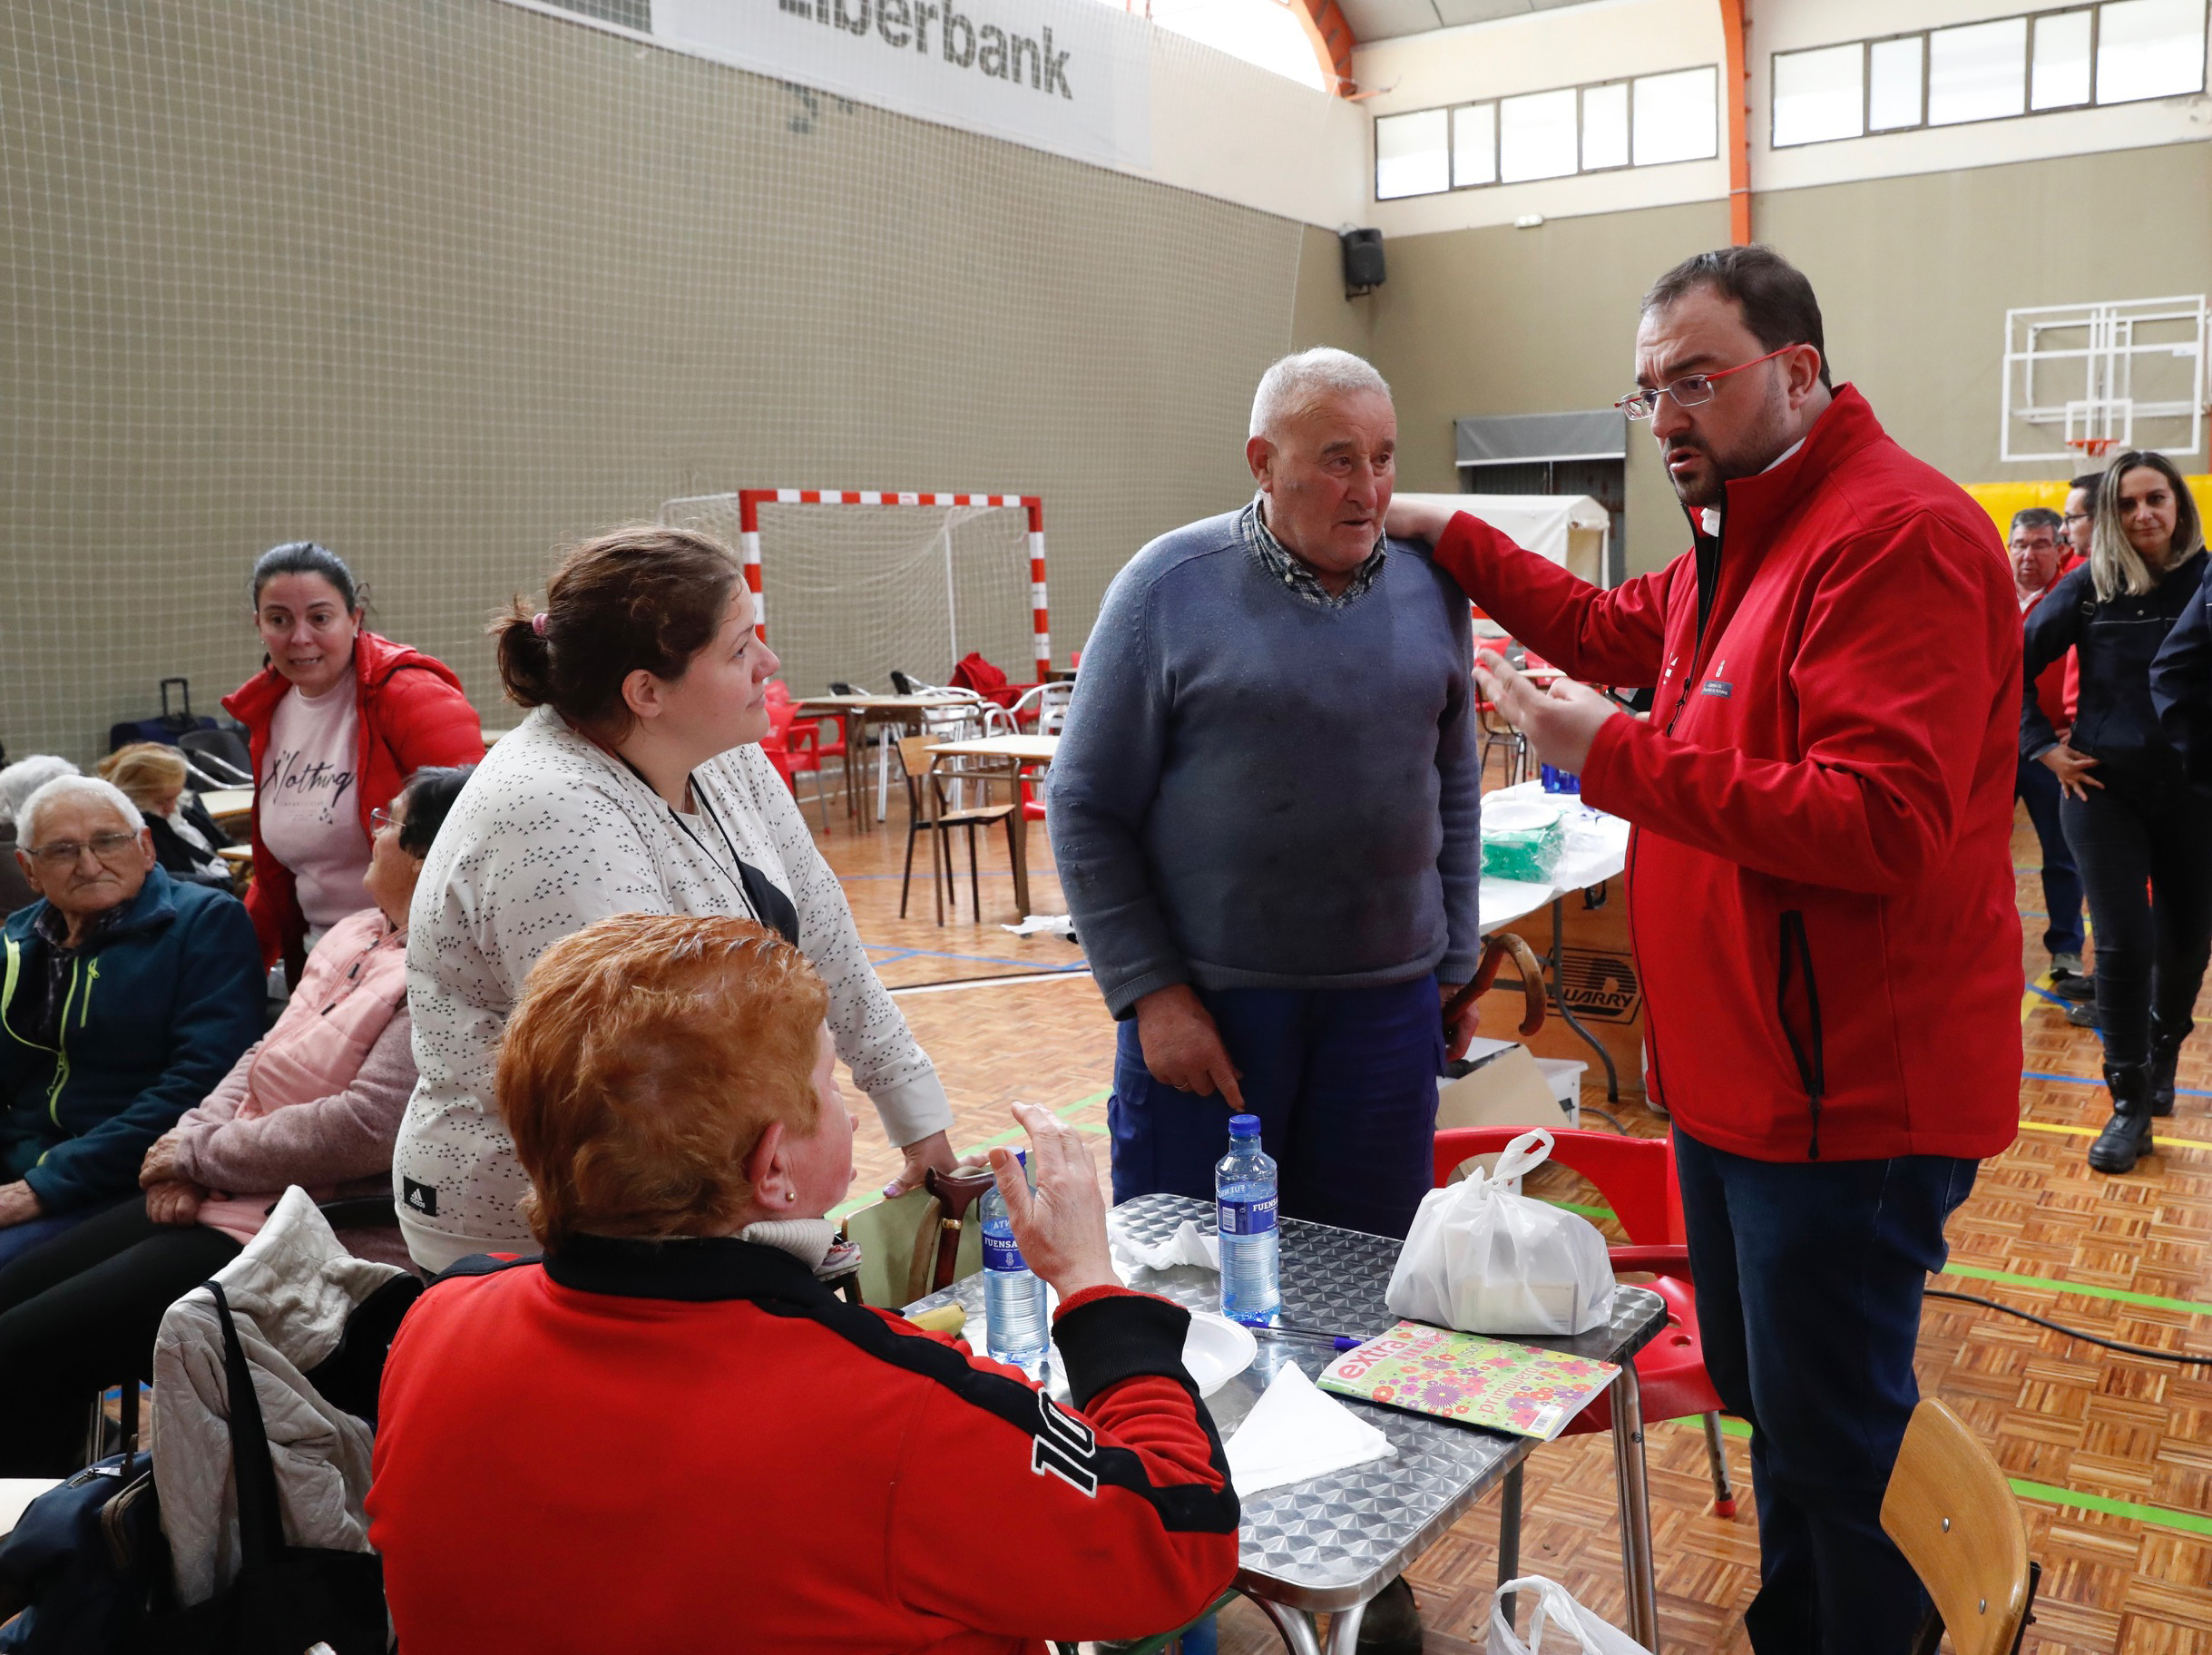 The president of Asturias, Adrian Barbn, visits the residents of Luarca evicted by the fire in a sports center.